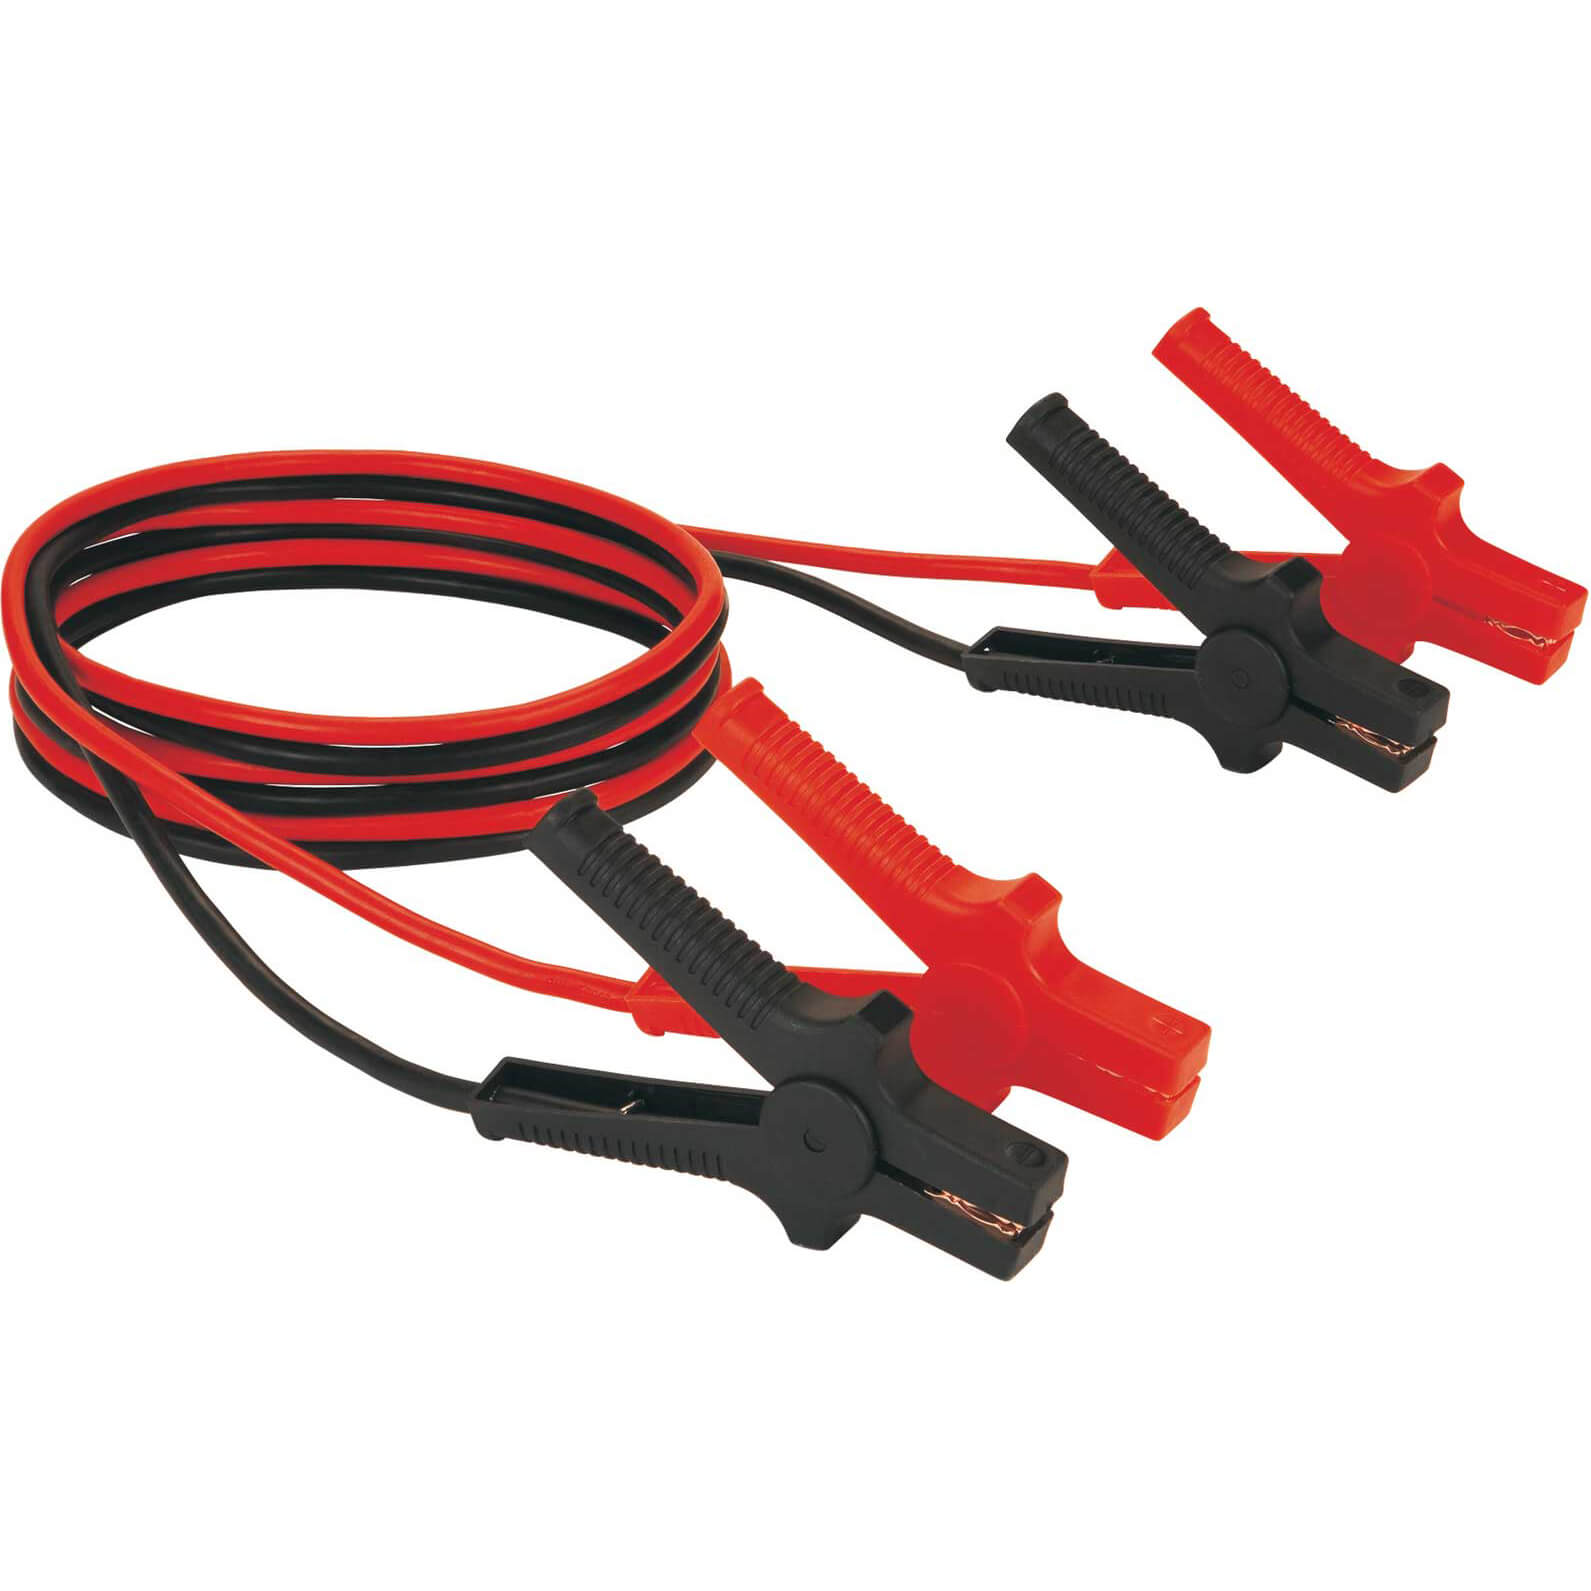 Image of Einhell BT-BO 25/1 A Booster or Jump Cable for Petrol and Diesel Engines 3.5m